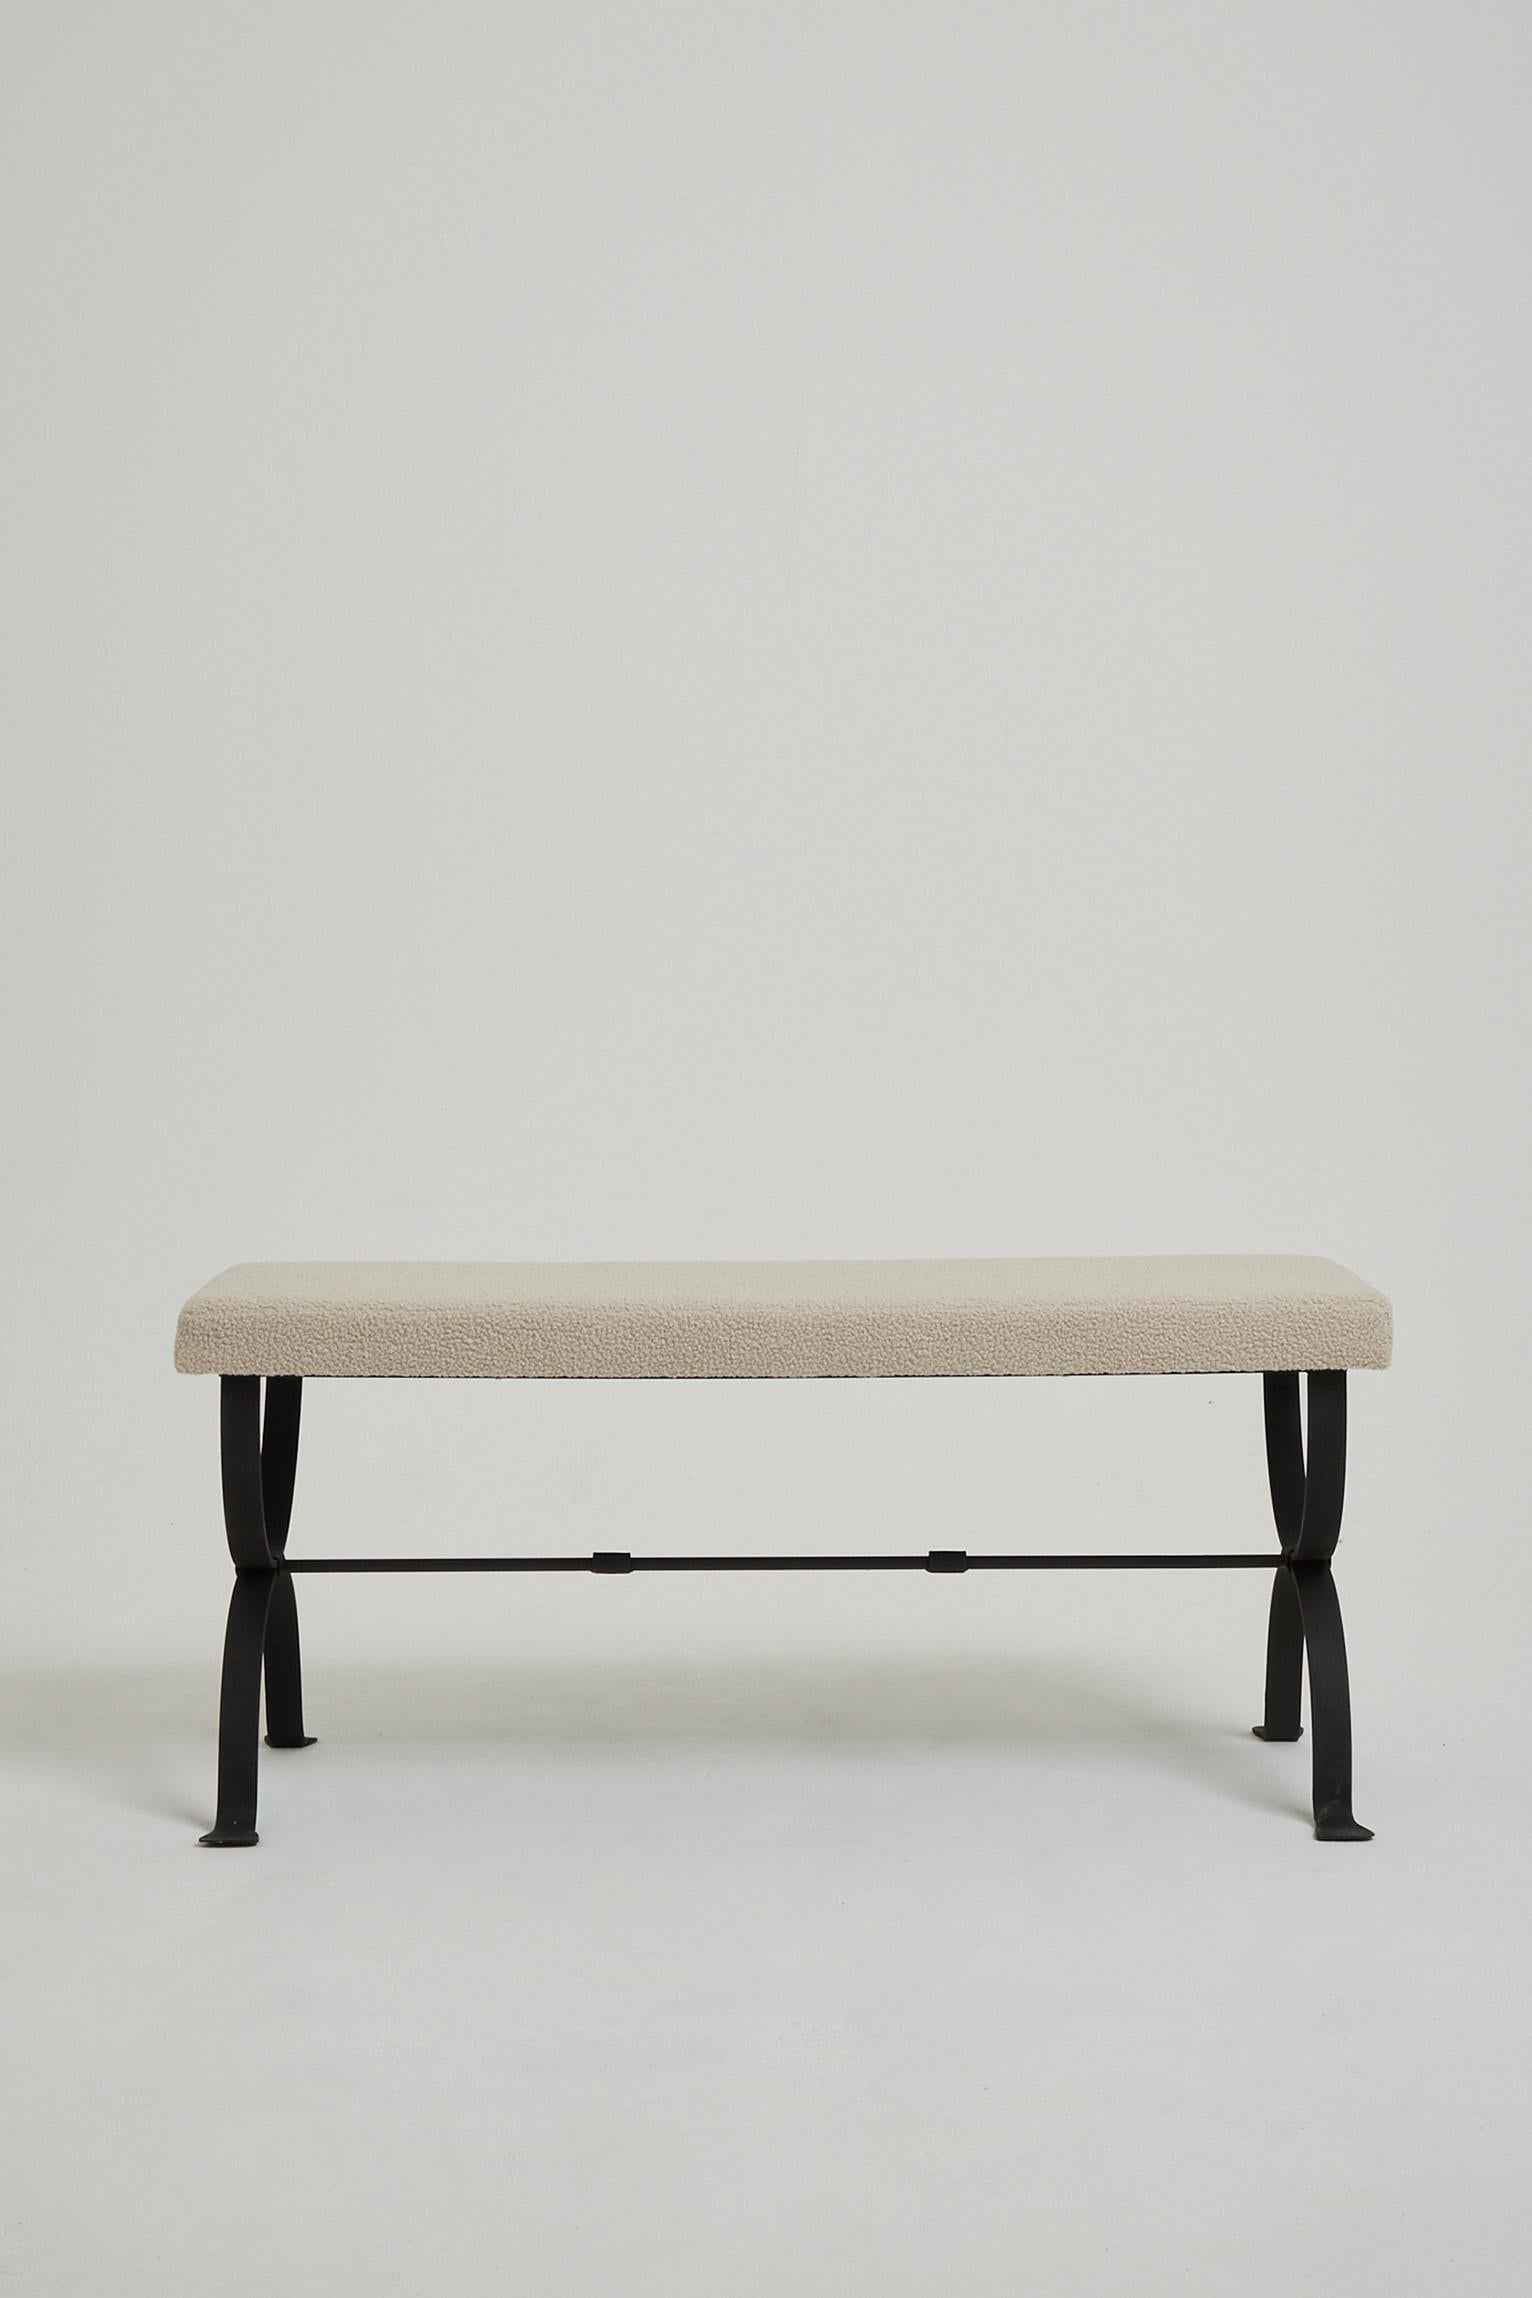 The 'Mahón' long stool, by Dorian Caffot de Fawes.
Black enamelled forged iron frame, upholstered in bouclé fabric. 
Hand made in Spain, upholstered in London.